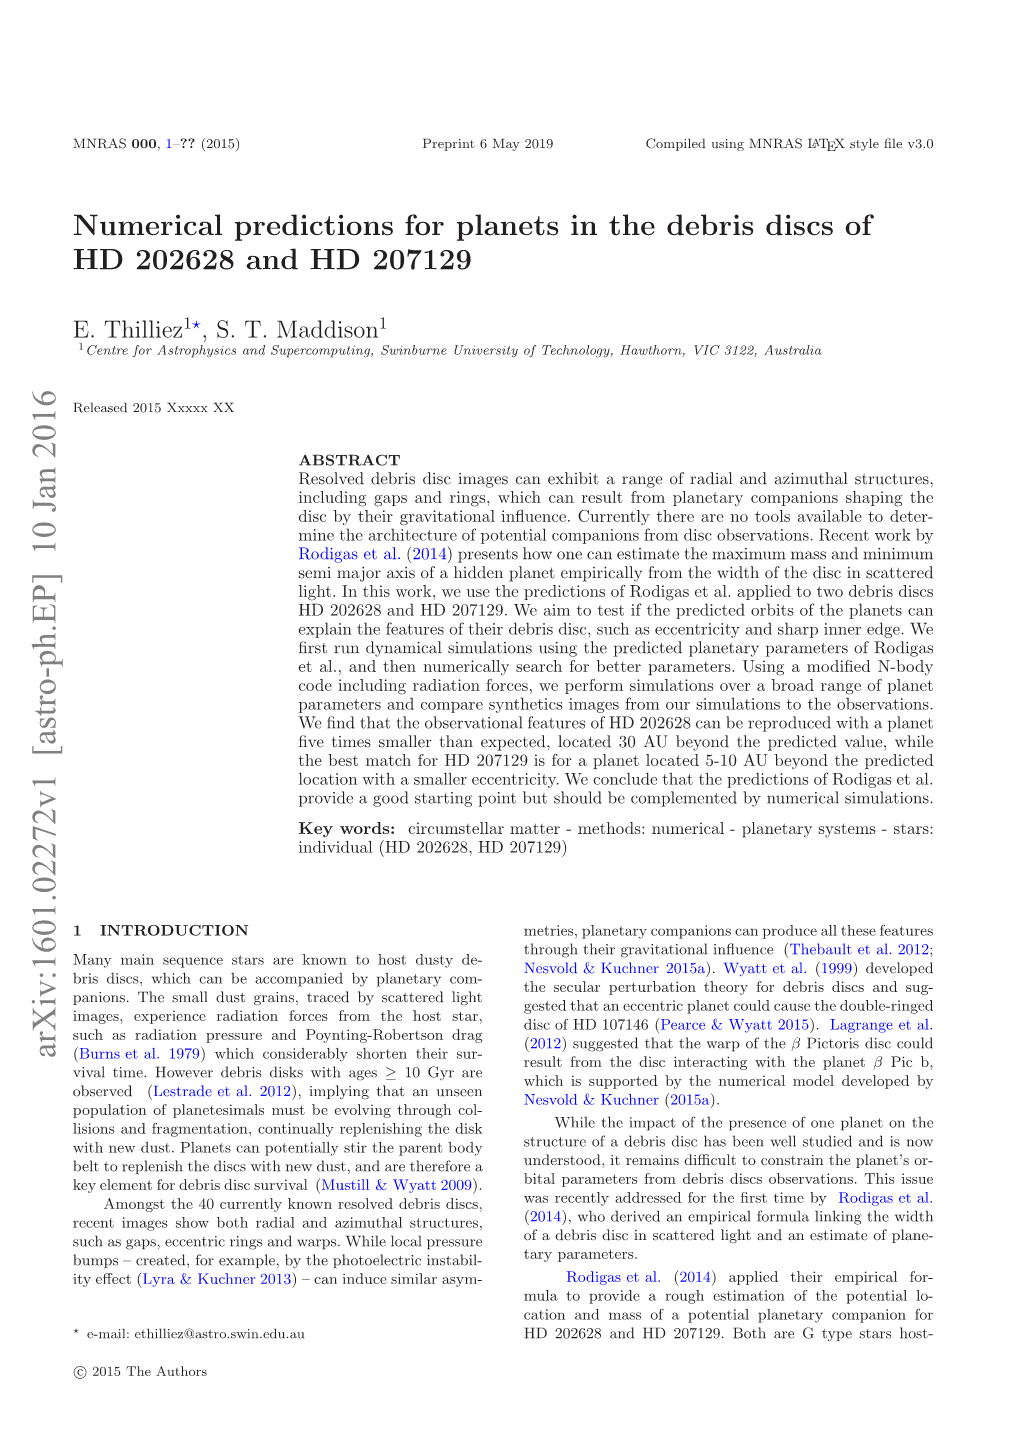 Numerical Predictions for Planets in the Debris Discs of HD 202628 and HD 207129 3